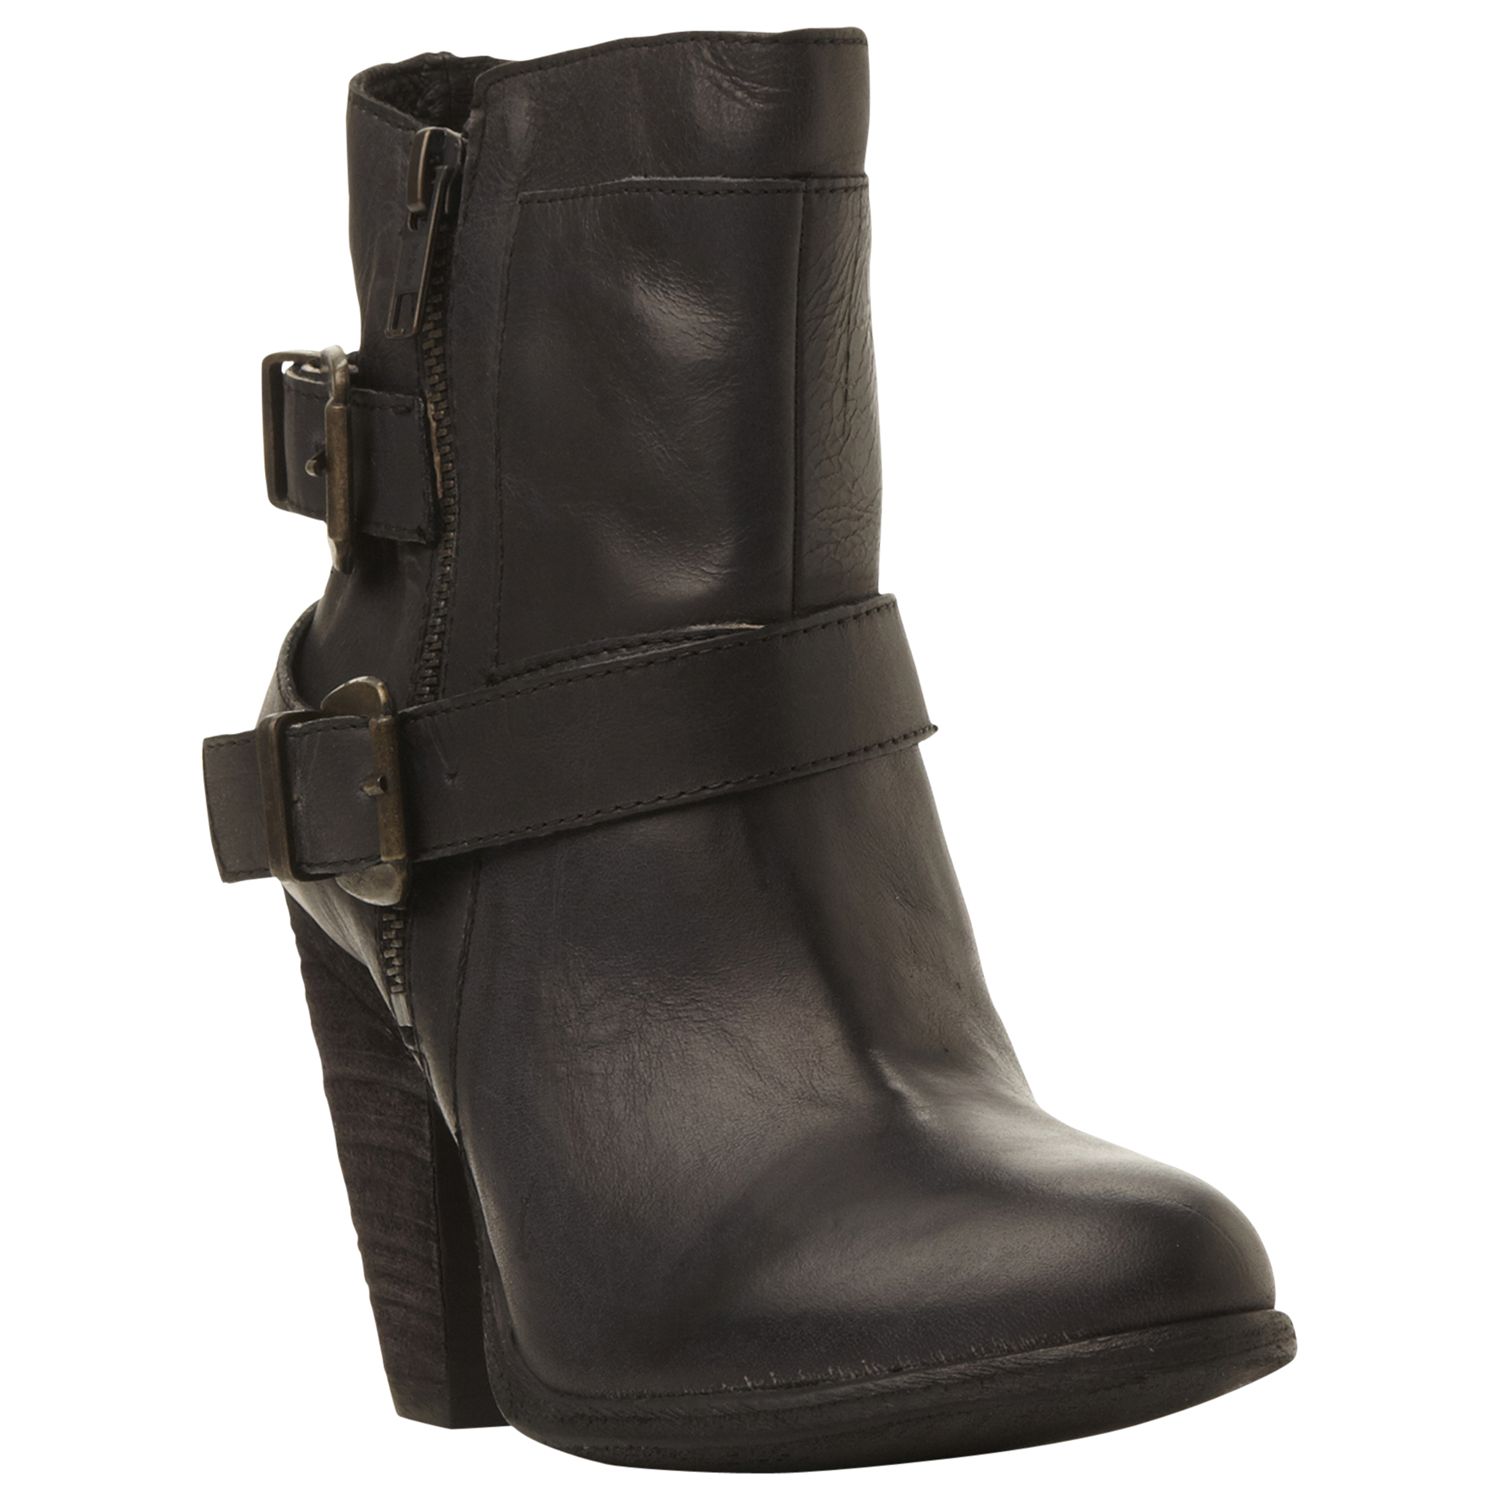 Steve Madden Nother Western Style Buckled Ankle Boot , Black Leather